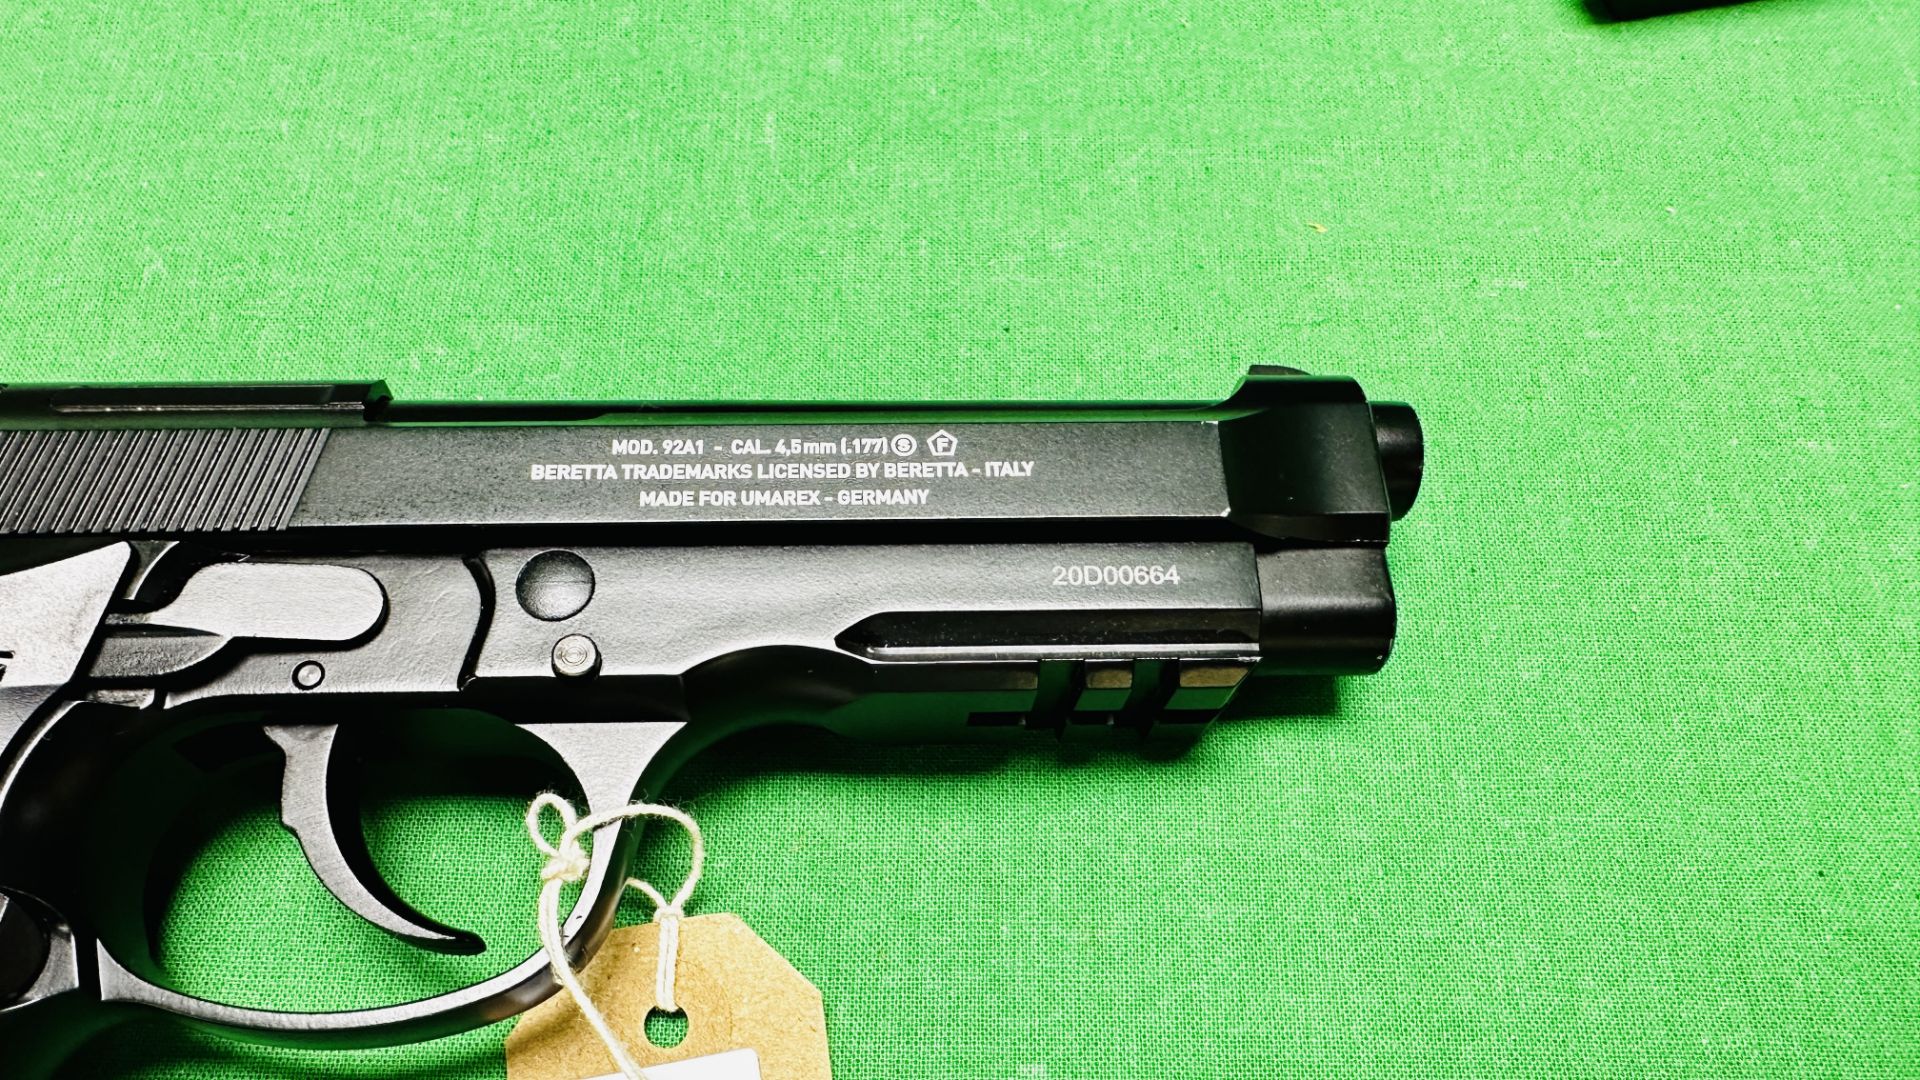 PIETRO BERETTA MOD 92 A1 18 ROUND CO2 BLOW BACK STEEL BB AIR PISTOL COMPLETE WITH ORIGINAL BOX, - Image 11 of 18